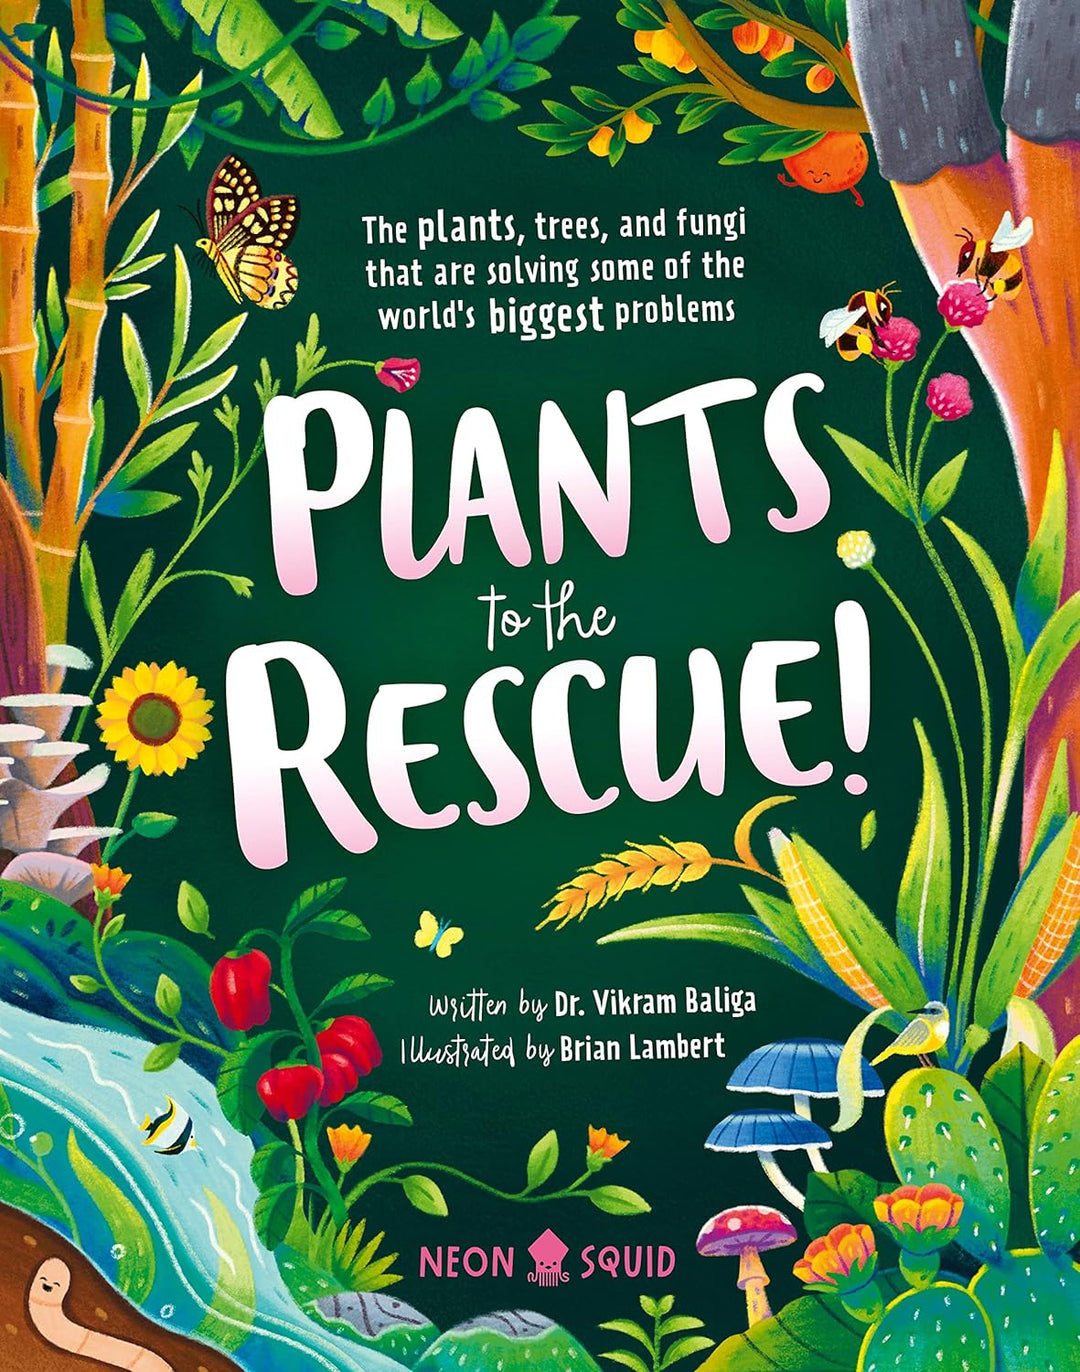 Plants to the Rescue: The Plants, Trees, and Fungi That Are Solving Some of the World's Biggest Problems